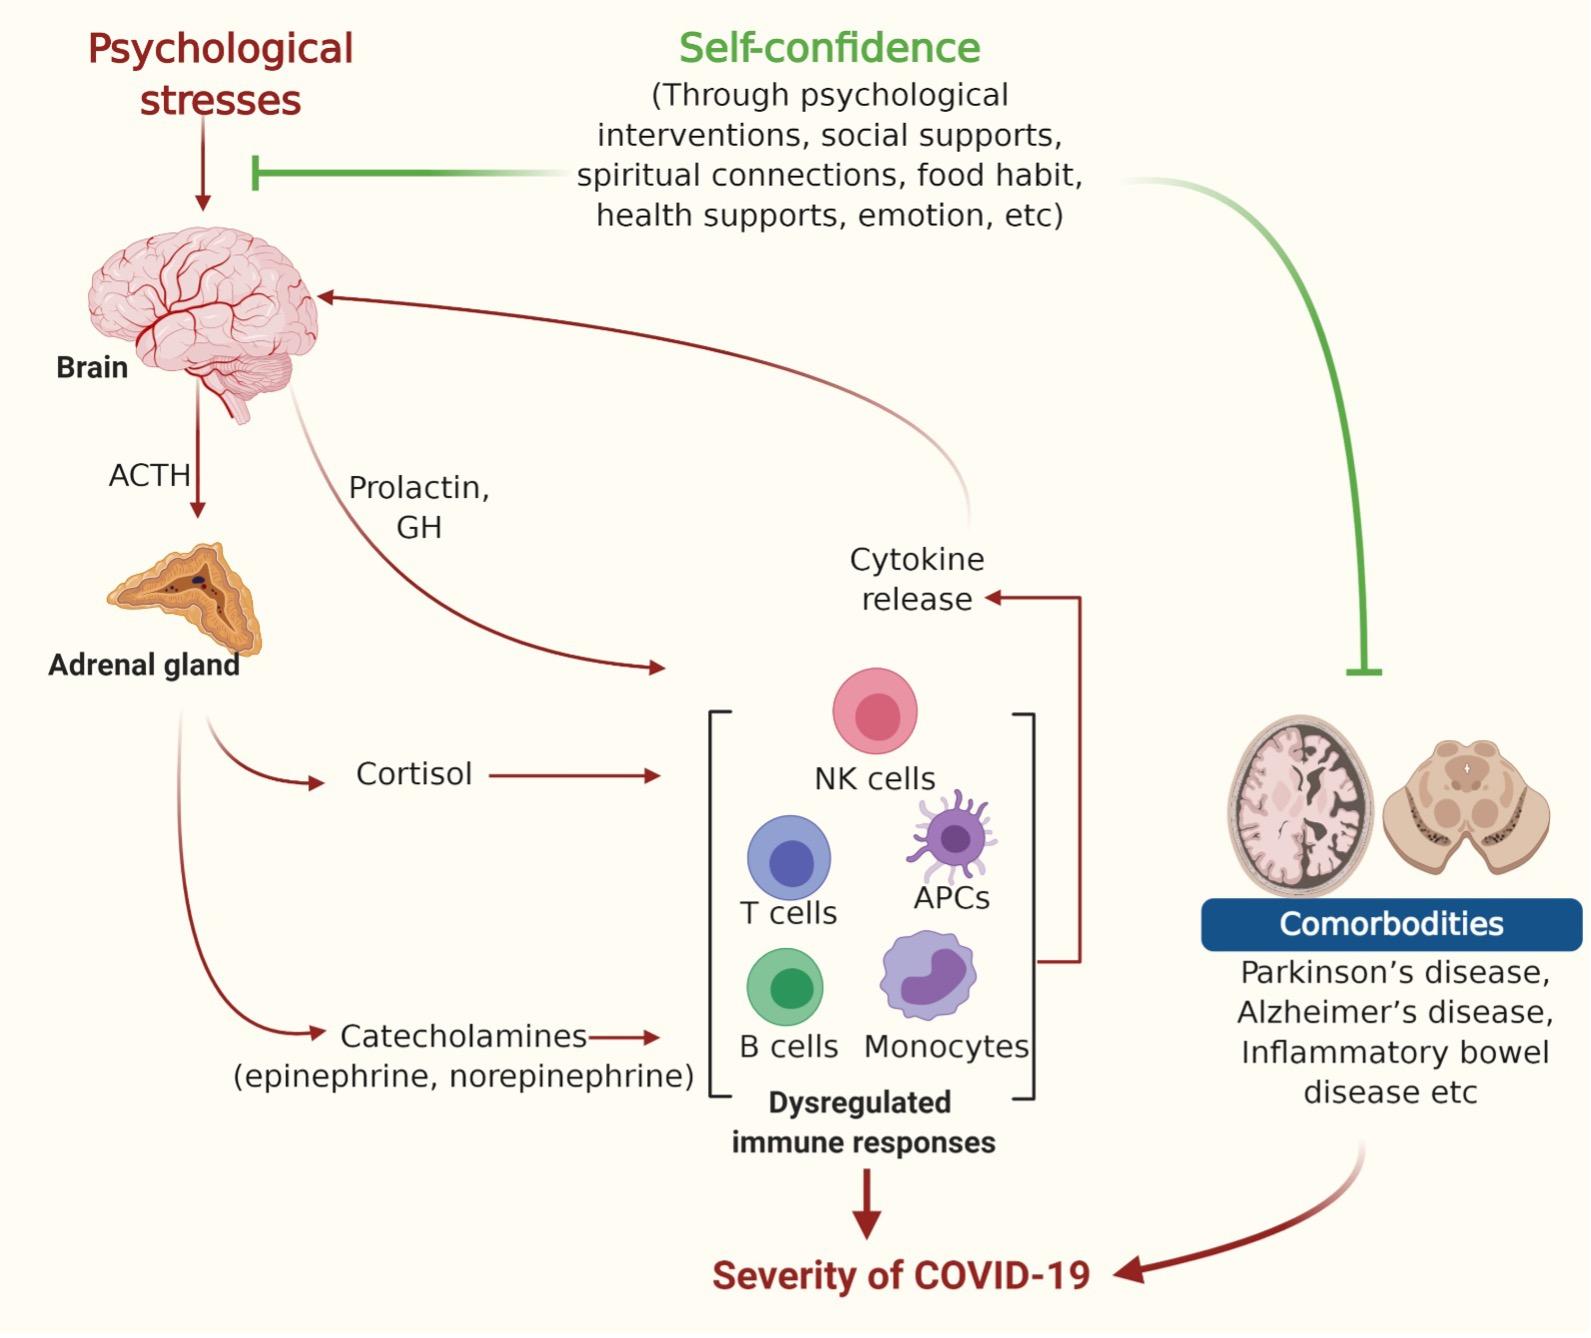 Self-confidence as an immune-modifying psychotherapeutic intervention for COVID-19 patients and understanding of its connection to CNS-endocrine-immune axis